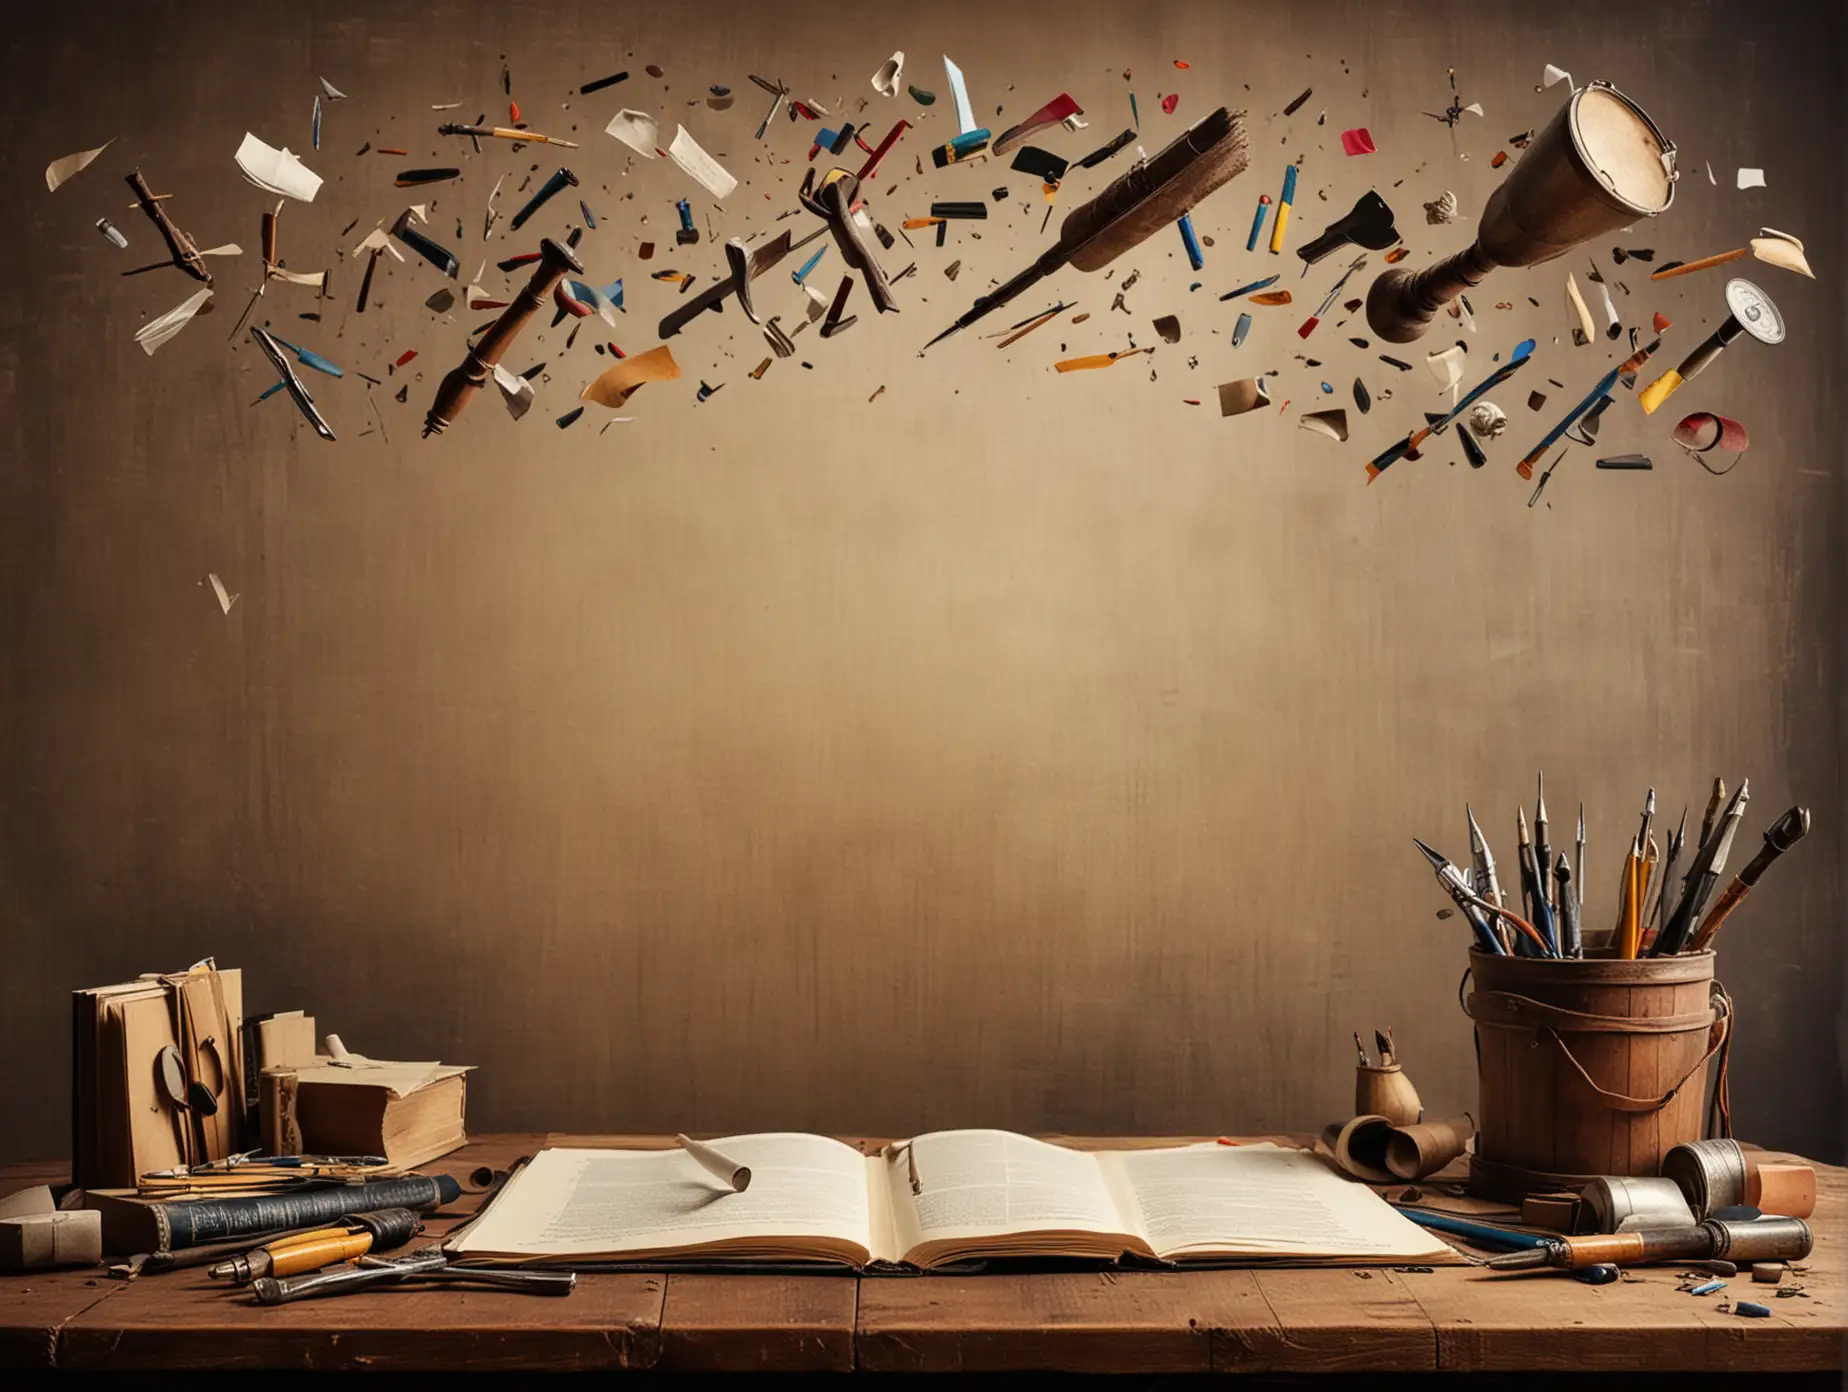 A writers studio background with tools to write a book flying around in the air 